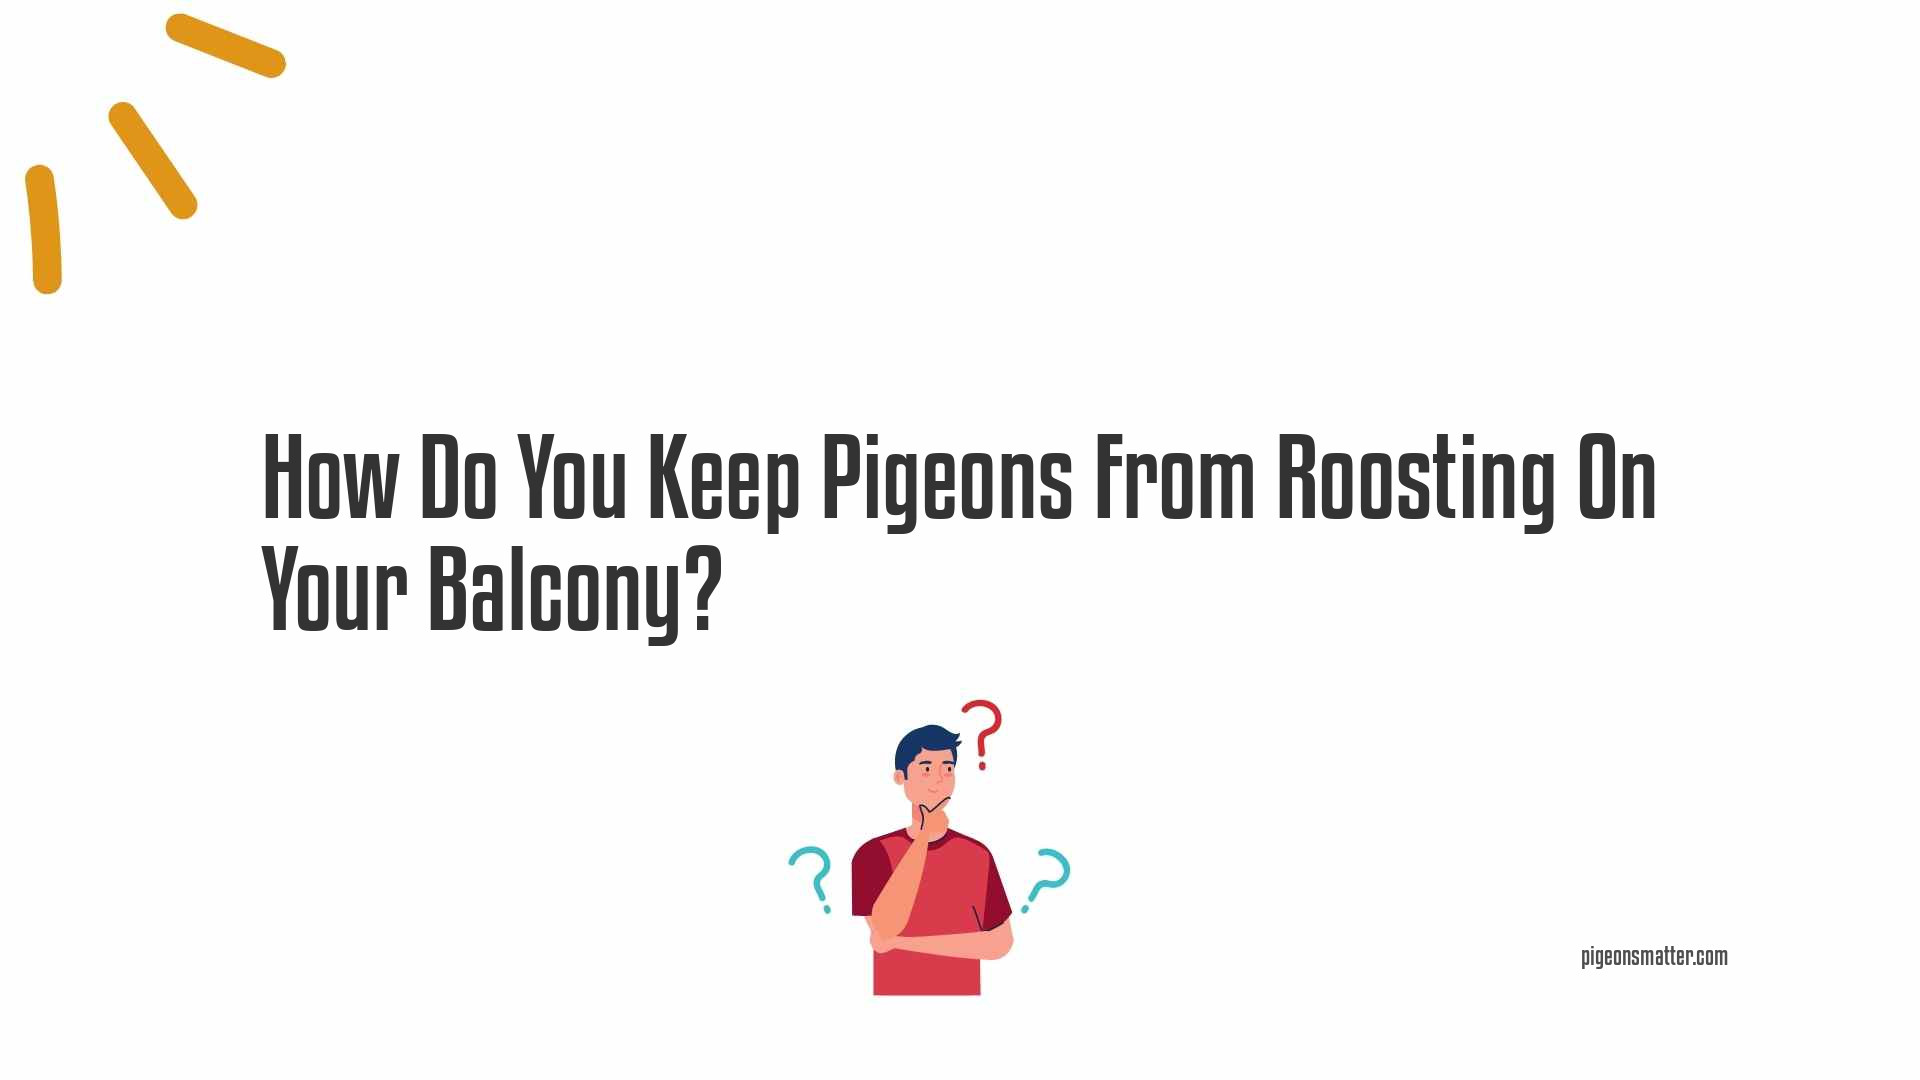 How Do You Keep Pigeons From Roosting On Your Balcony?